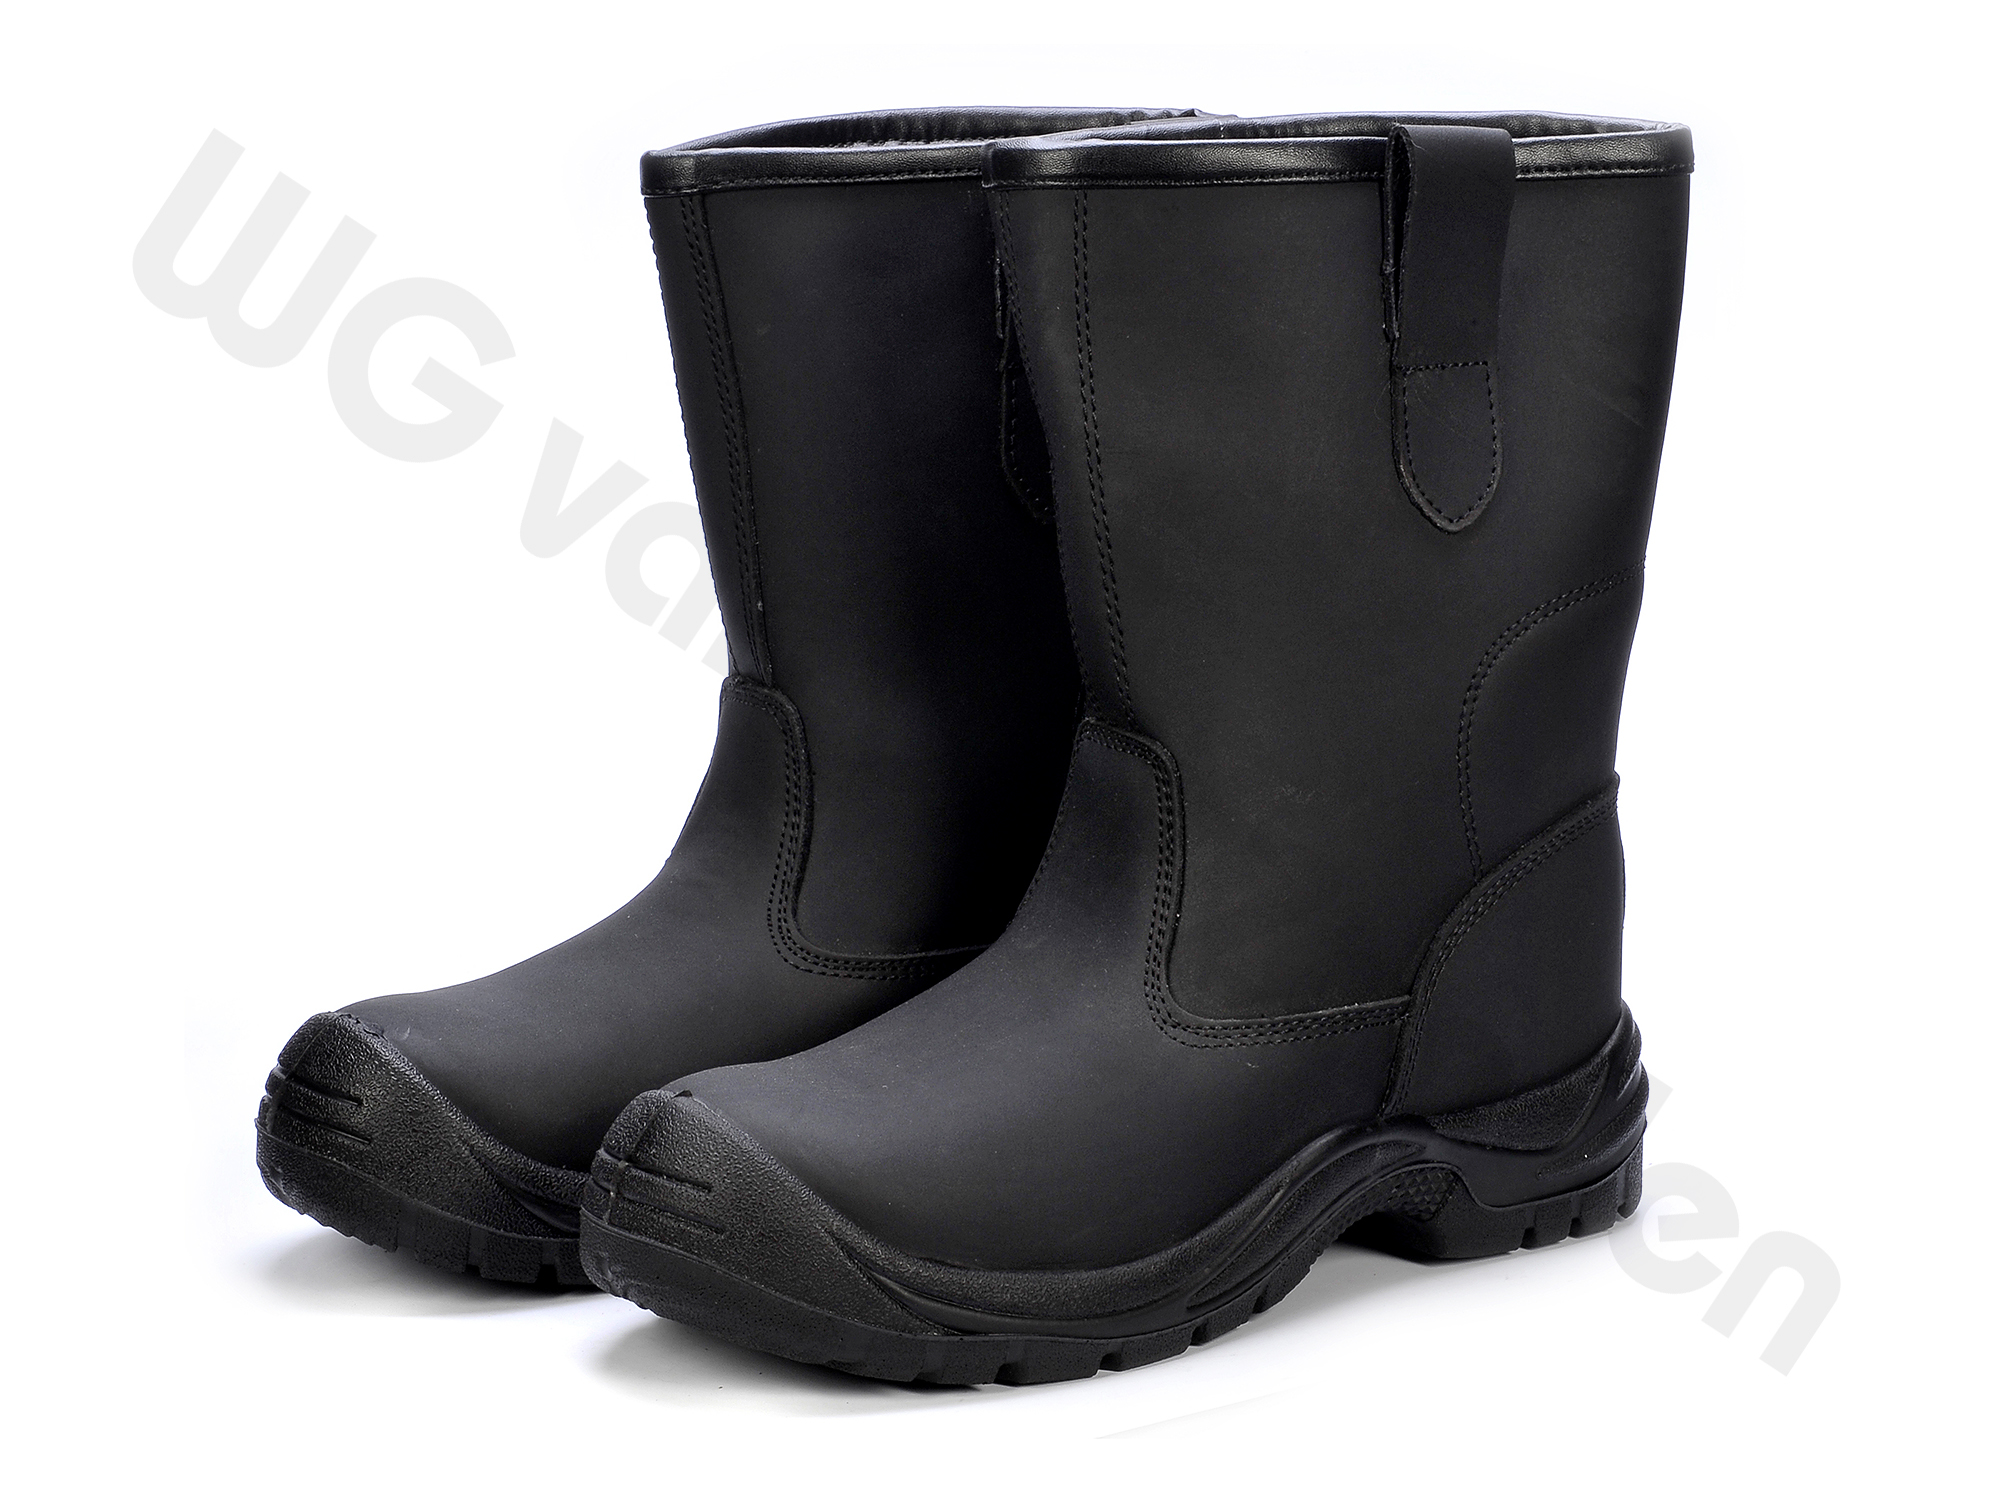 880356 BOOTS SAFETY S3 LEATHER W/STEEL TOE AND LINING 45/28.5CM